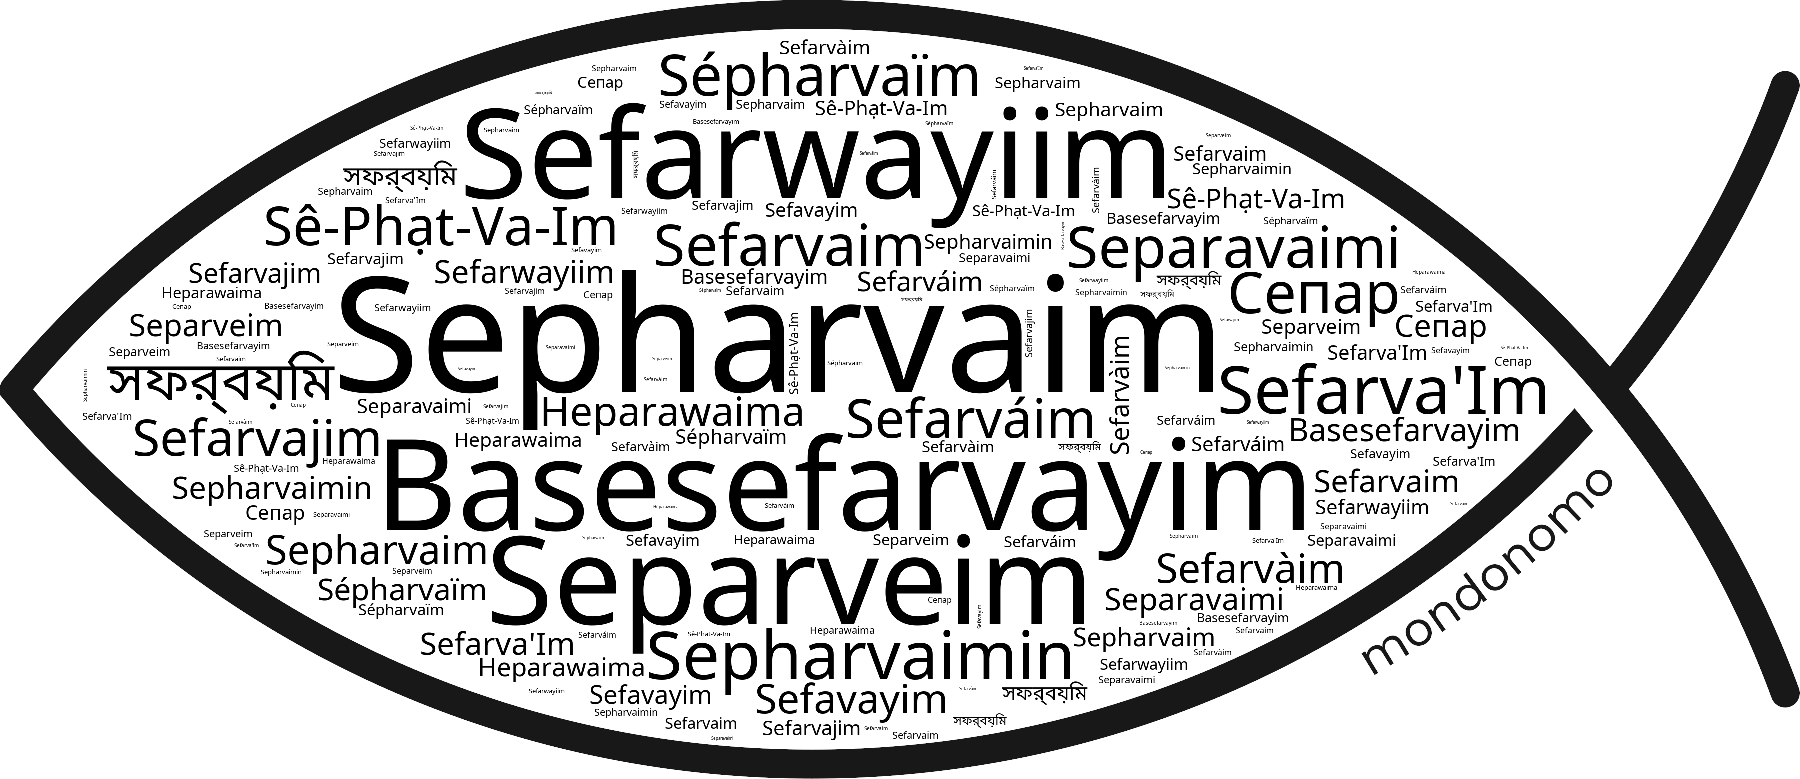 Name Sepharvaim in the world's Bibles